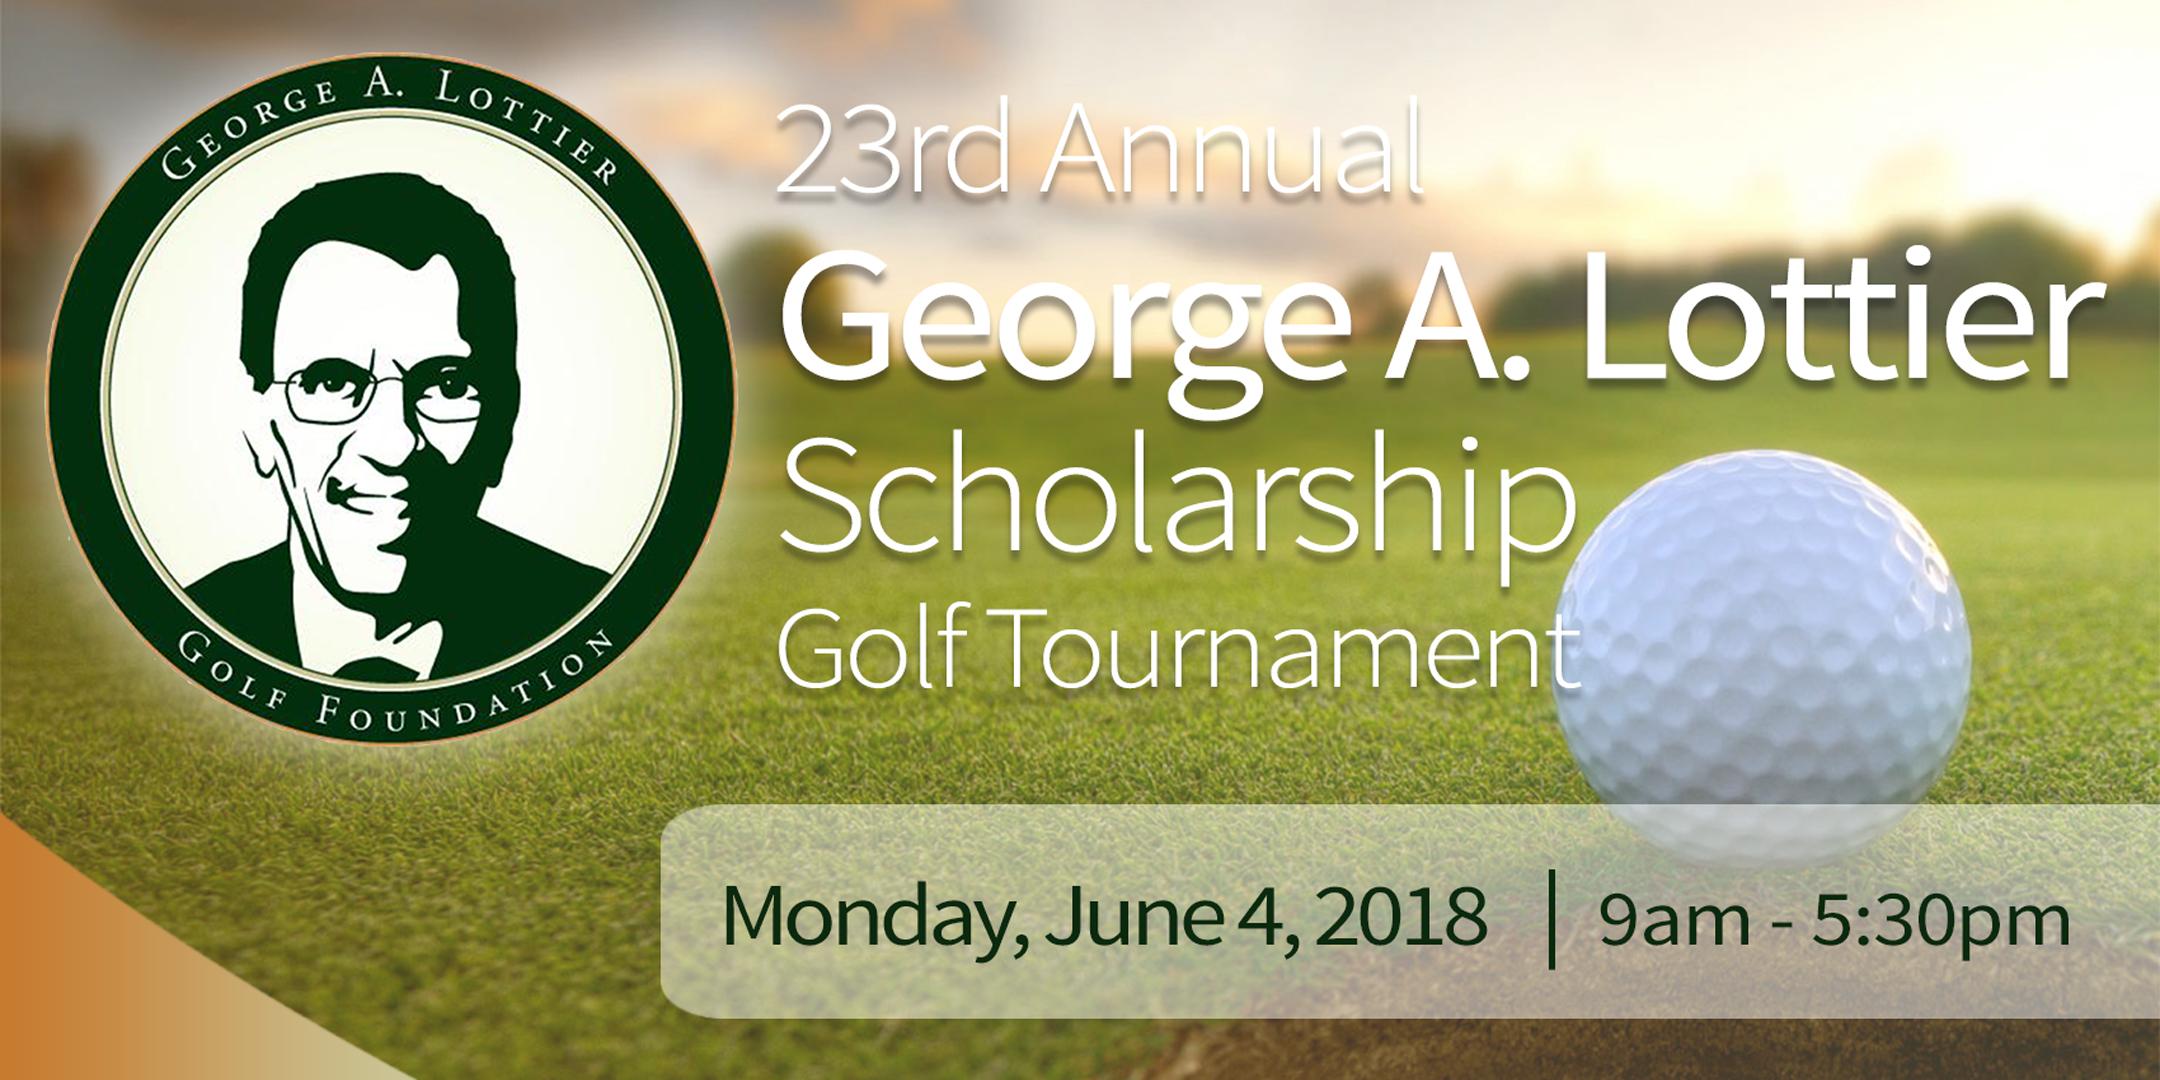 23rd Annual George A. Lottier Scholarship Golf Tournament